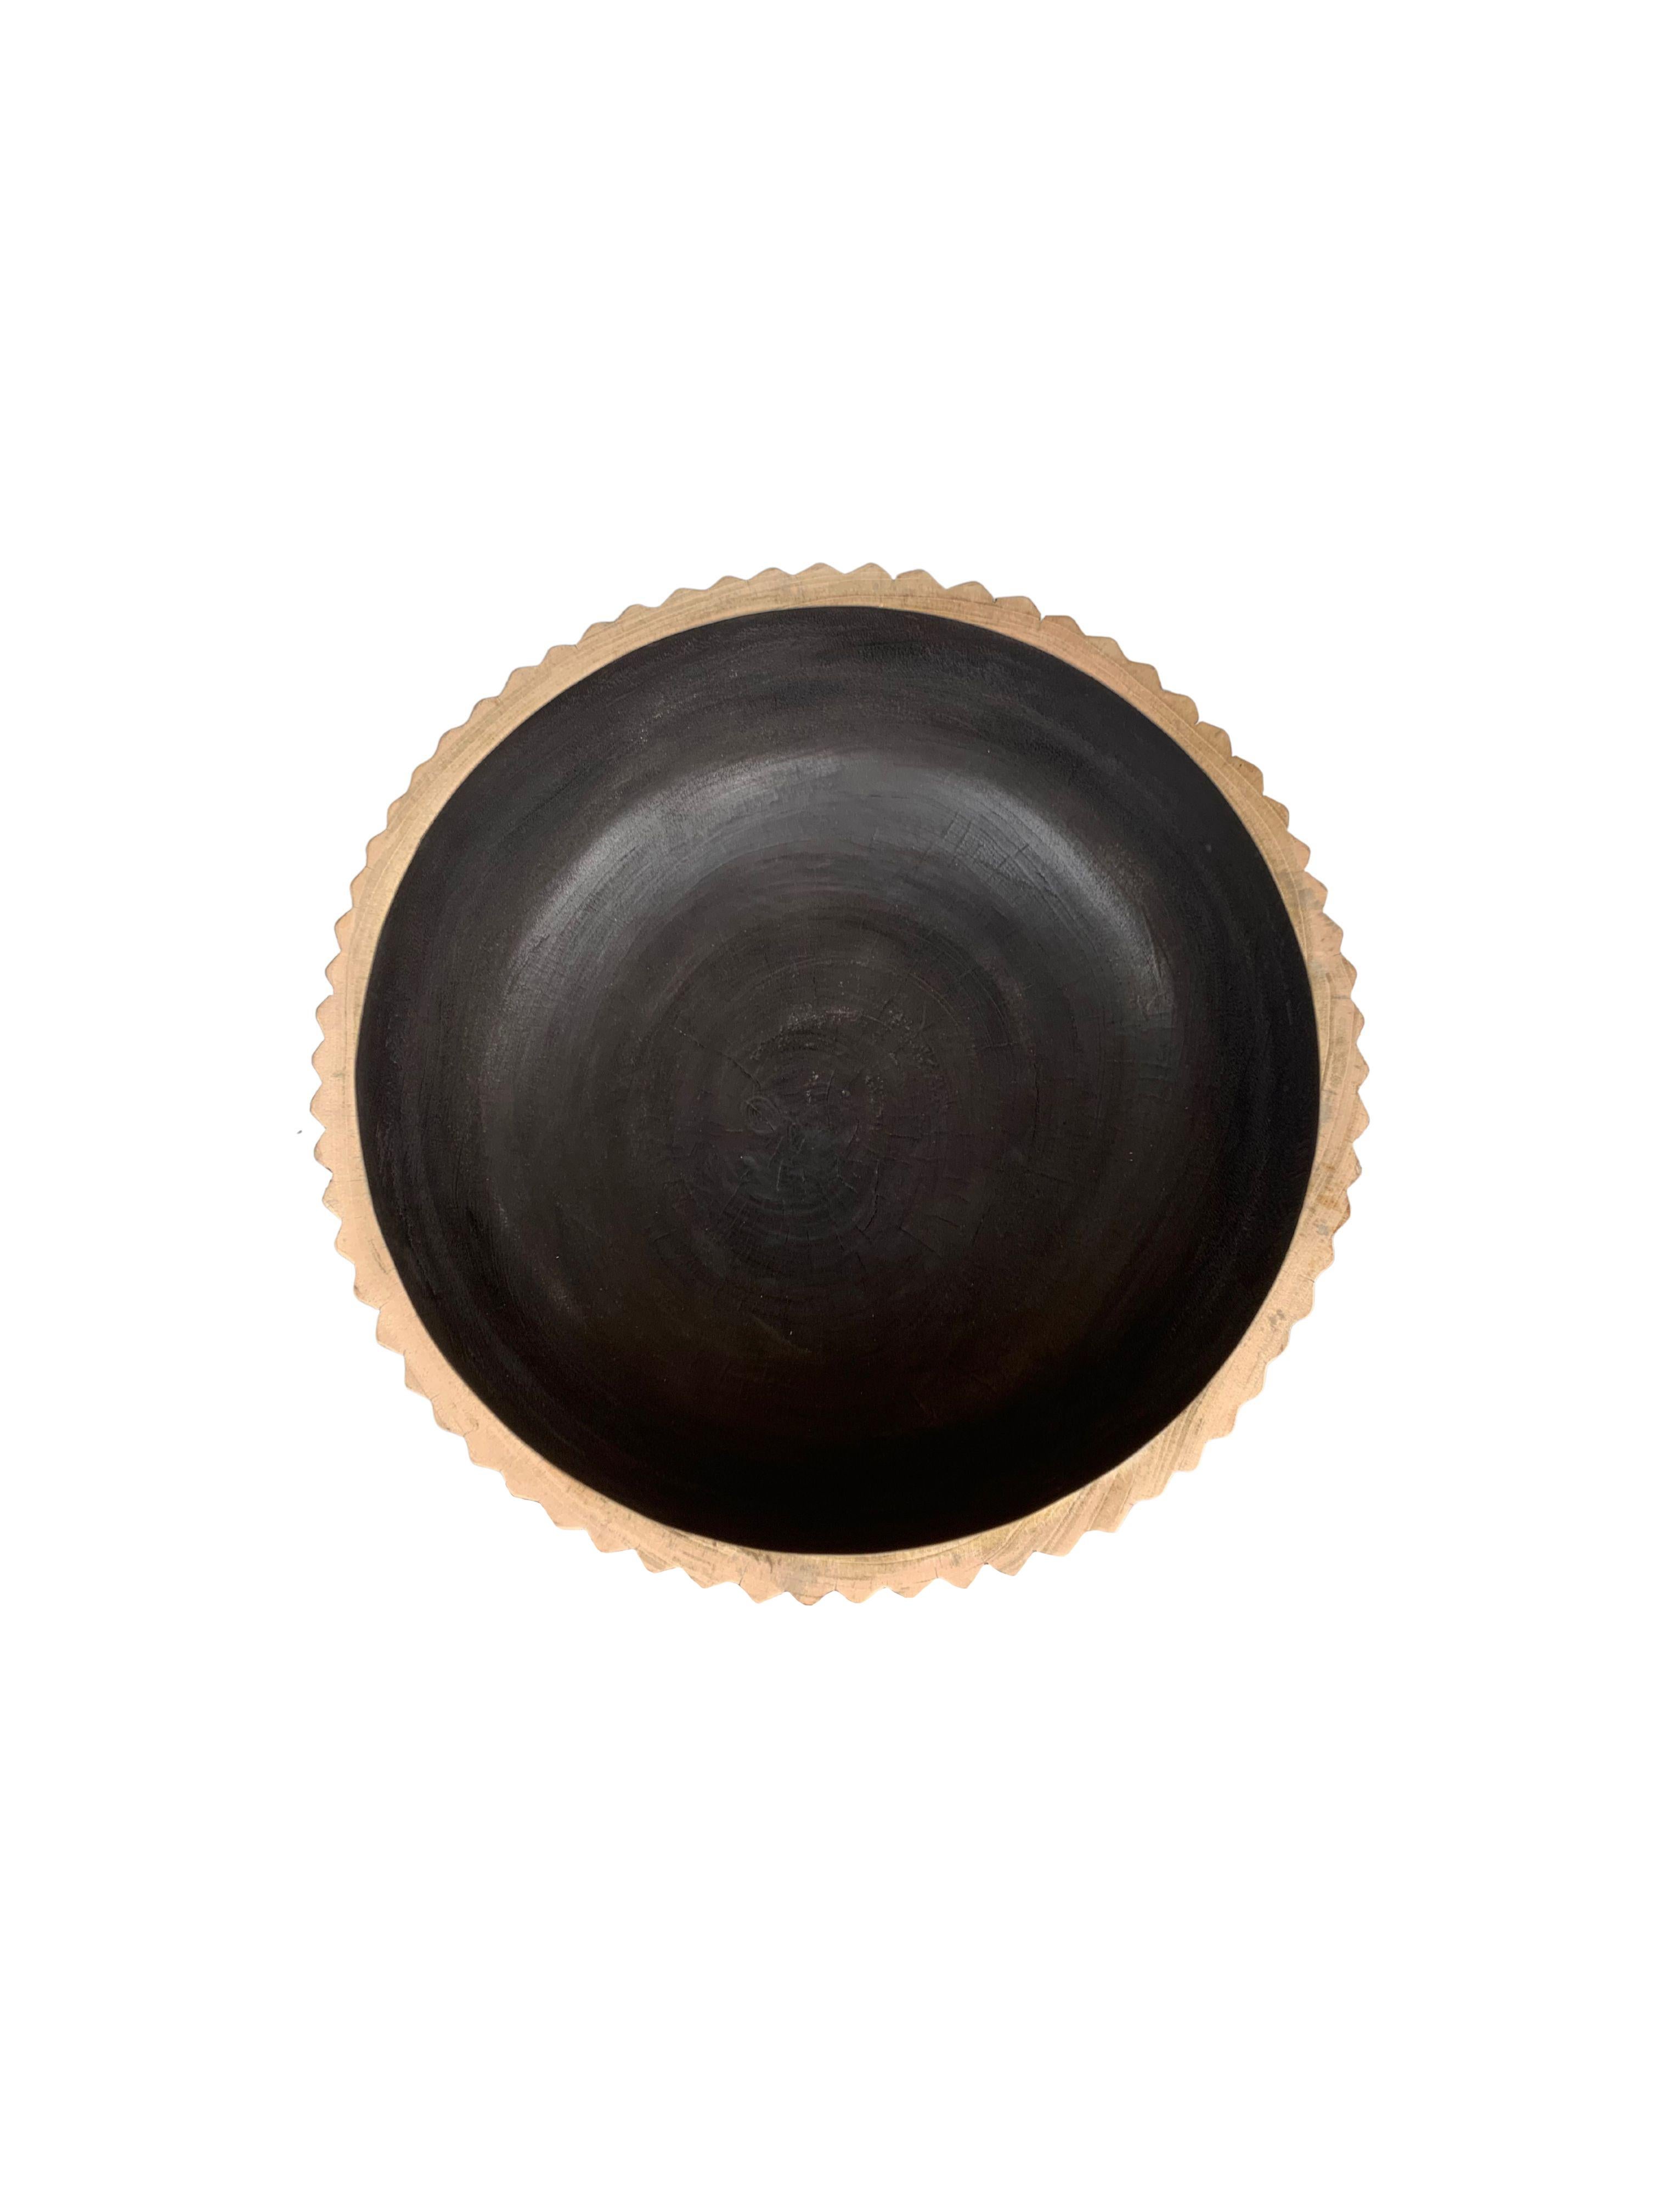 Organic Modern Solid Mango Wood Bowl with Burnt Finish For Sale